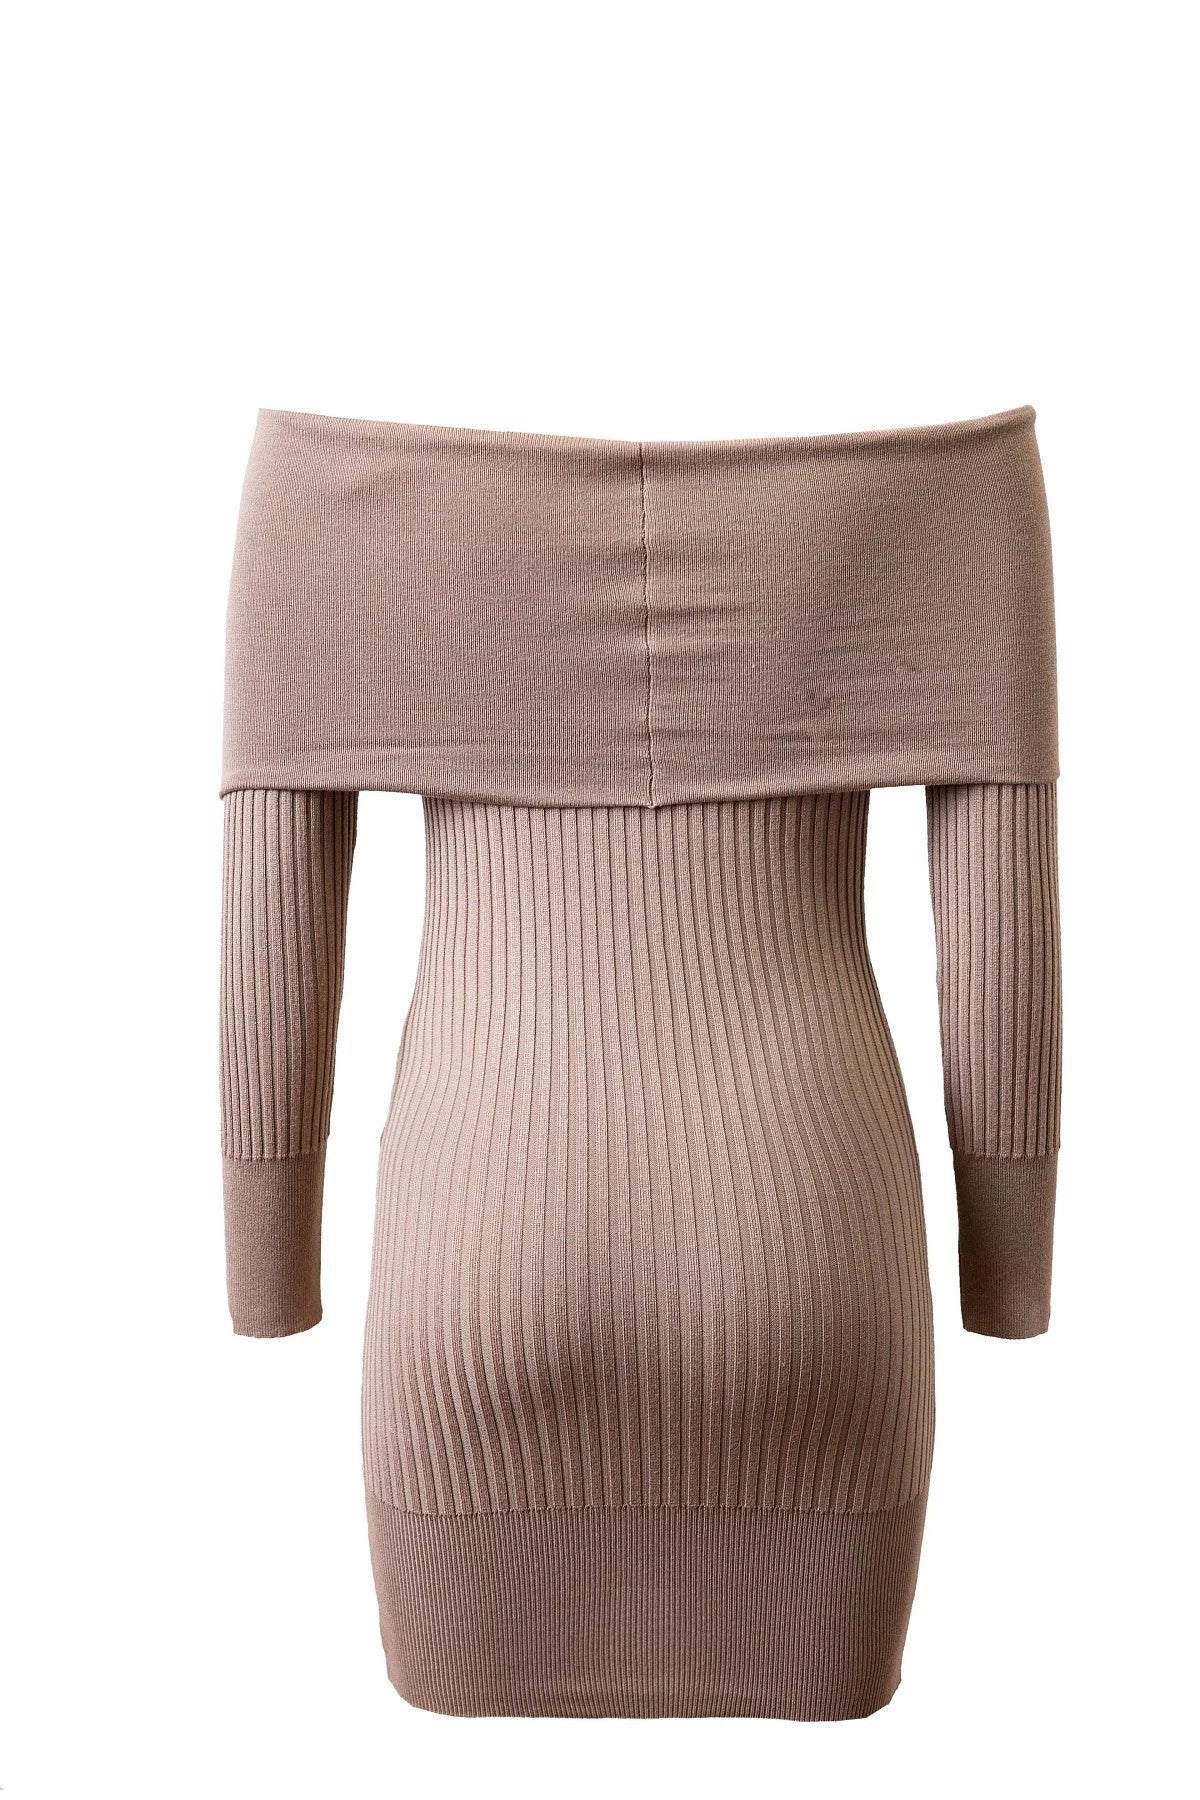 Off Shoulder Bodycon Knitting Sweater Dress